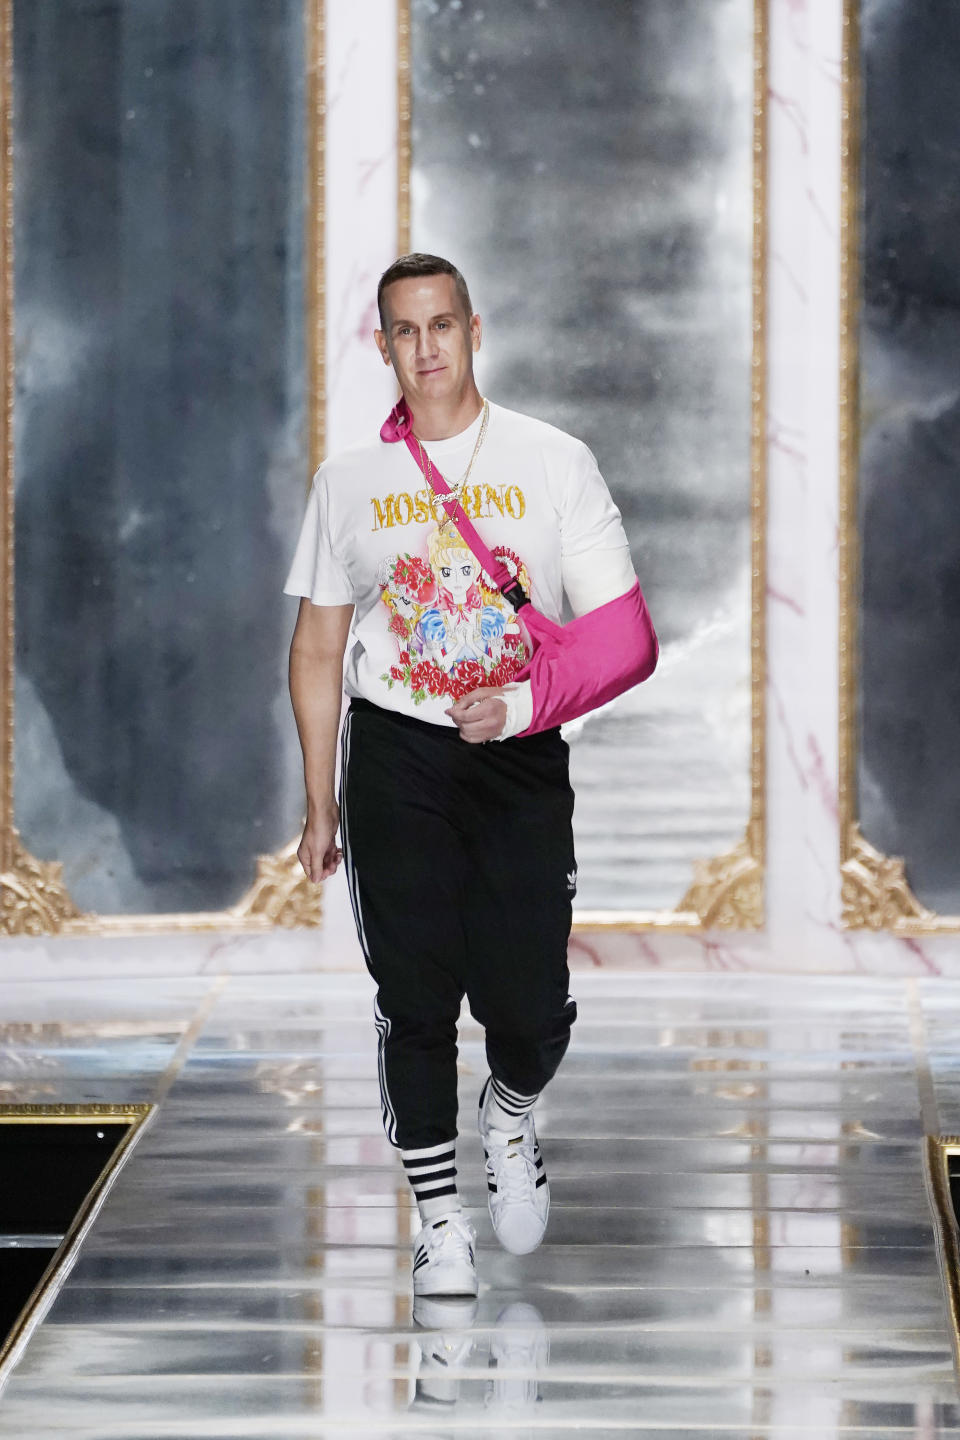 The Best Moments from Jeremy Scott’s Tenure at Moschino